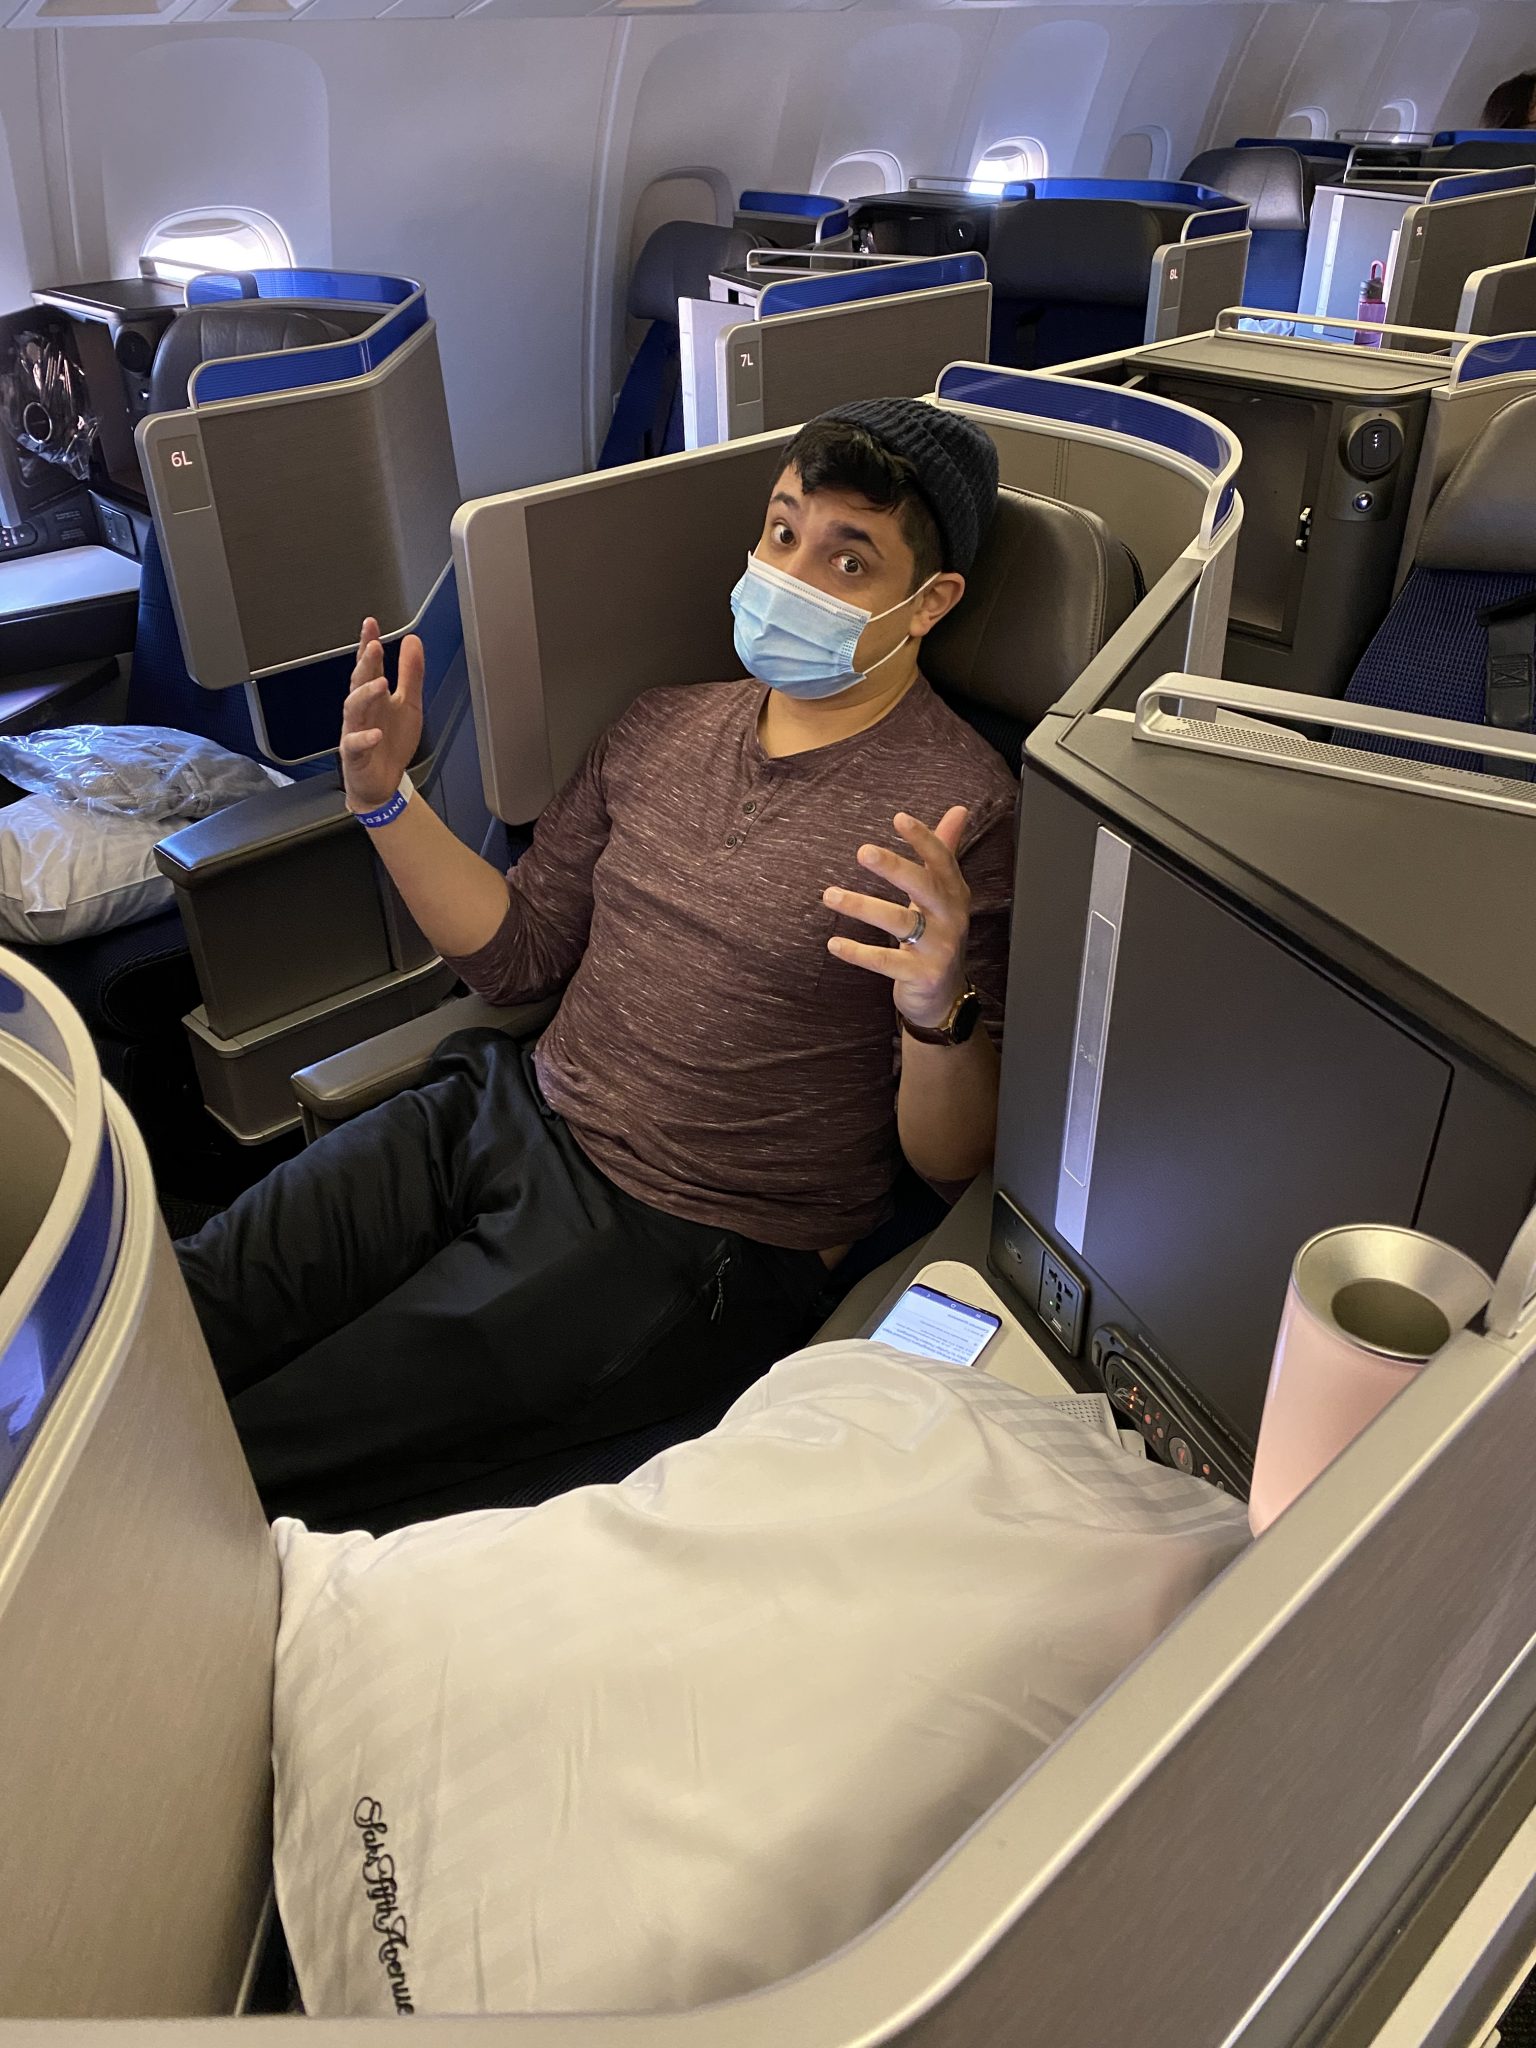 Quick Review Of The United Airlines Business Class Seat You Can Book To ...